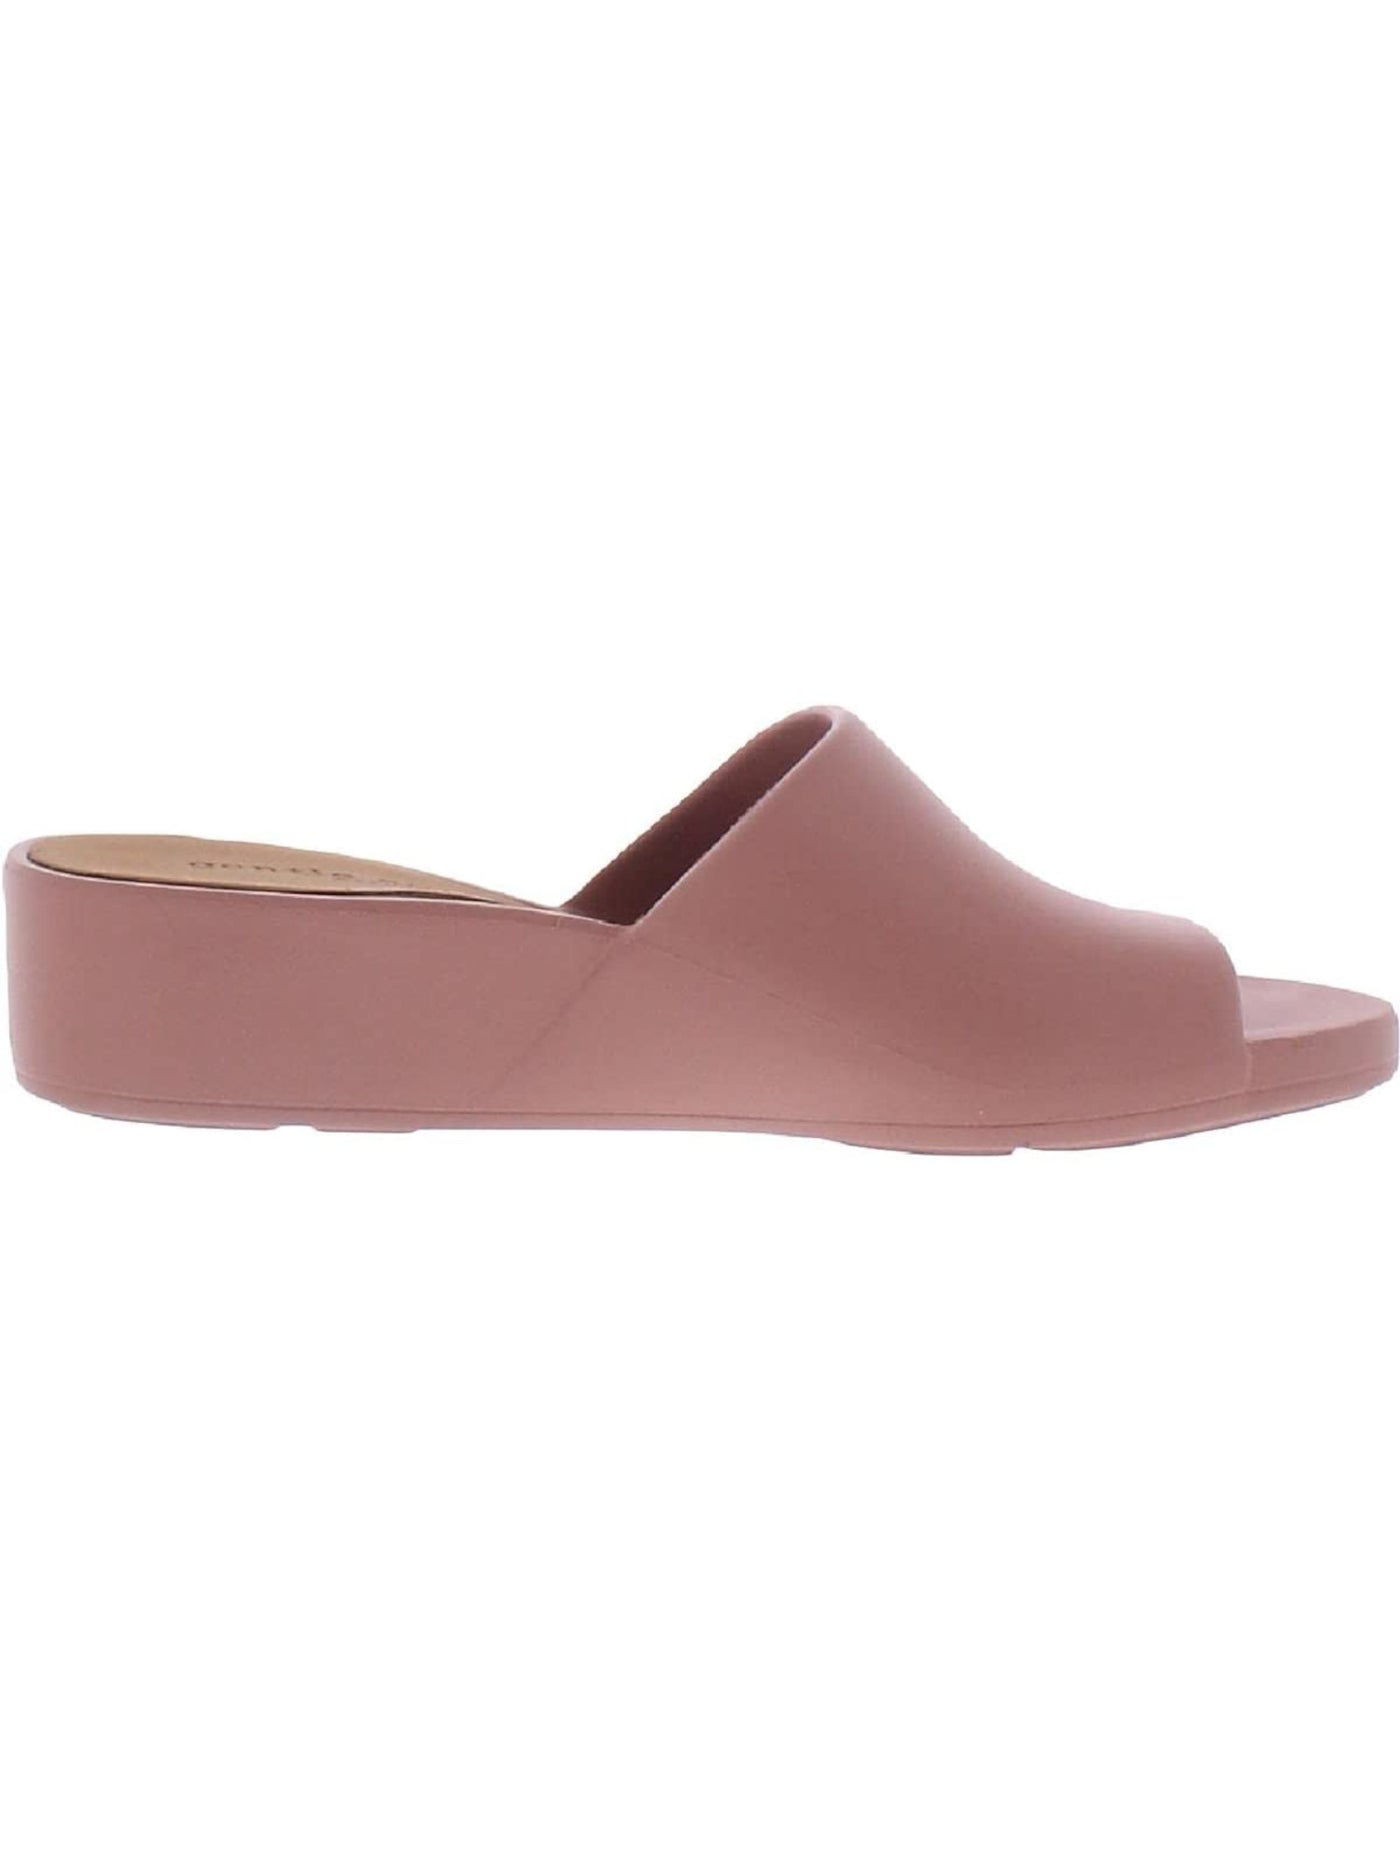 GENTLE SOULS KENNETH COLE Womens Pink Clay Cushioned Arch Support Gentle Souls Gisele Round Toe Wedge Slip On Slide Sandals Shoes 11